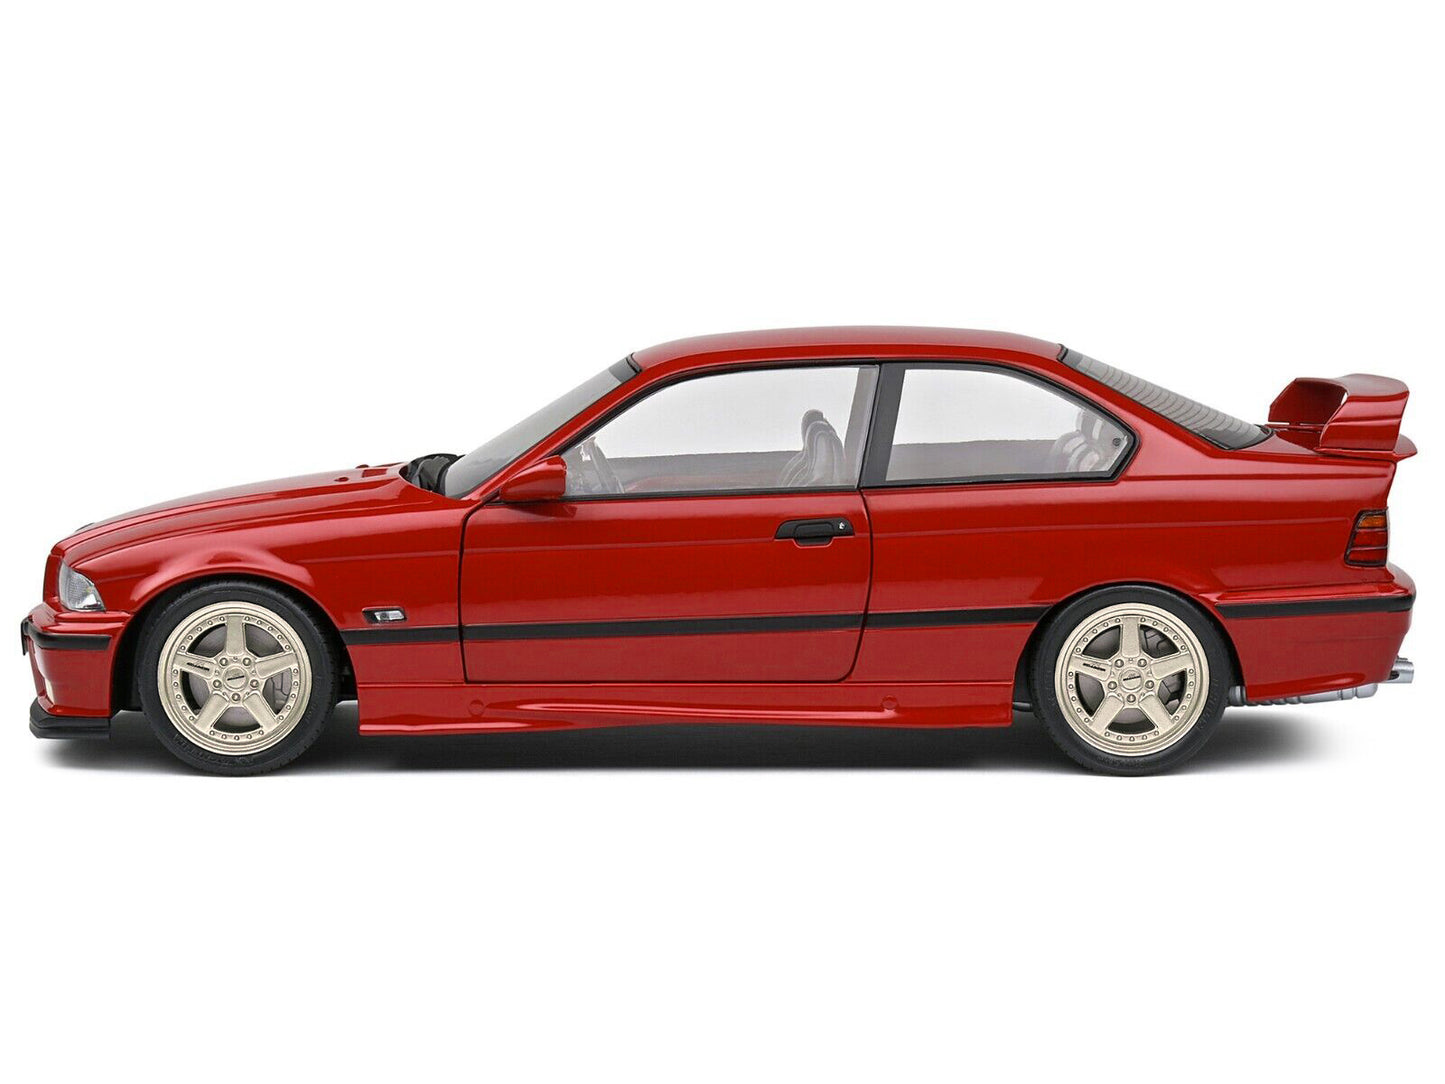 1994 BMW E36 M3 Streetfighter Imolarot Red 1/18 Diecast Model Car by Solido